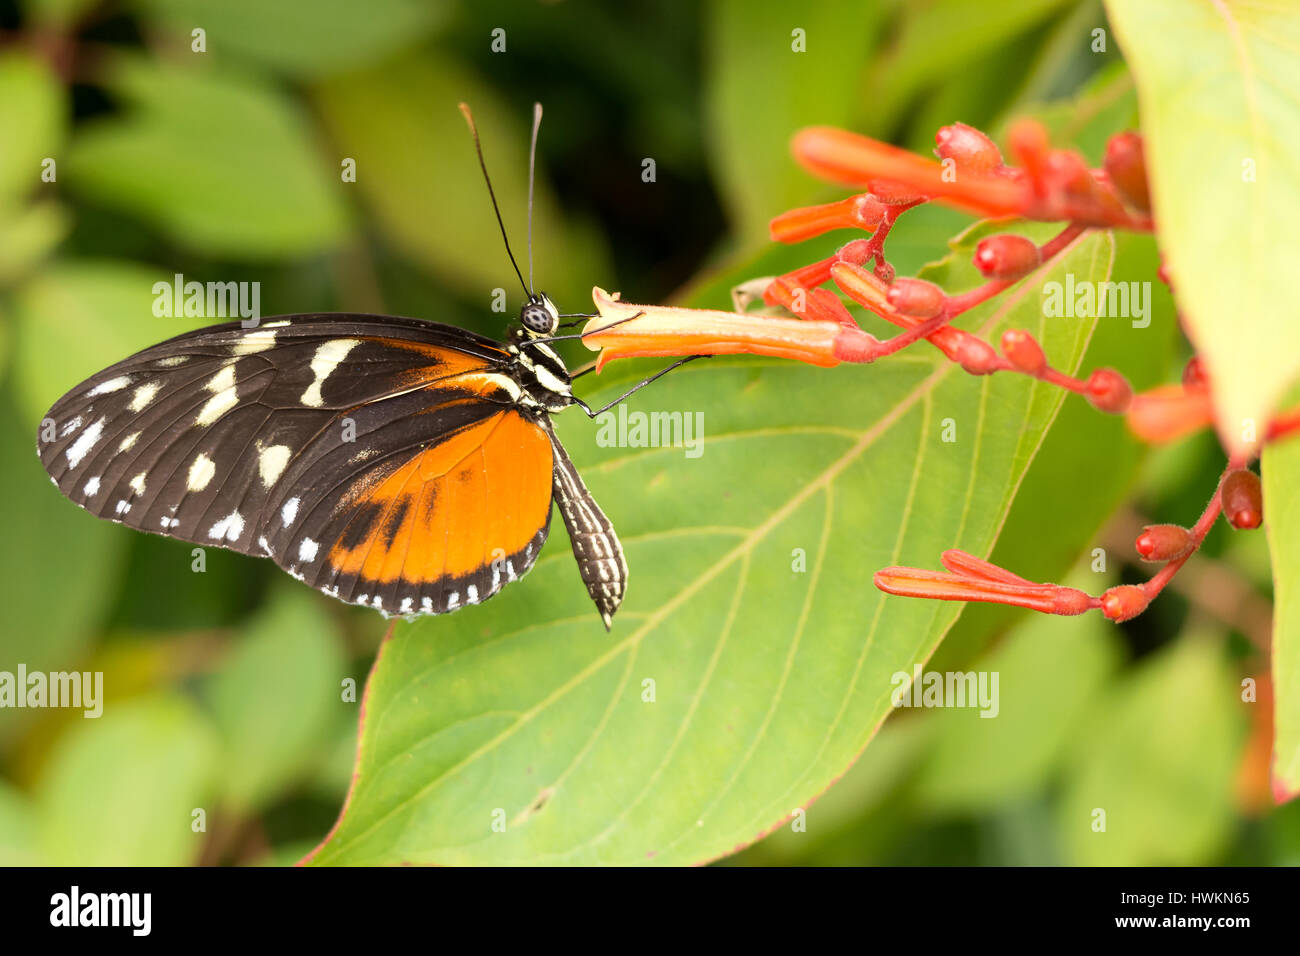 Heliconius hecale butterfly Banque D'Images